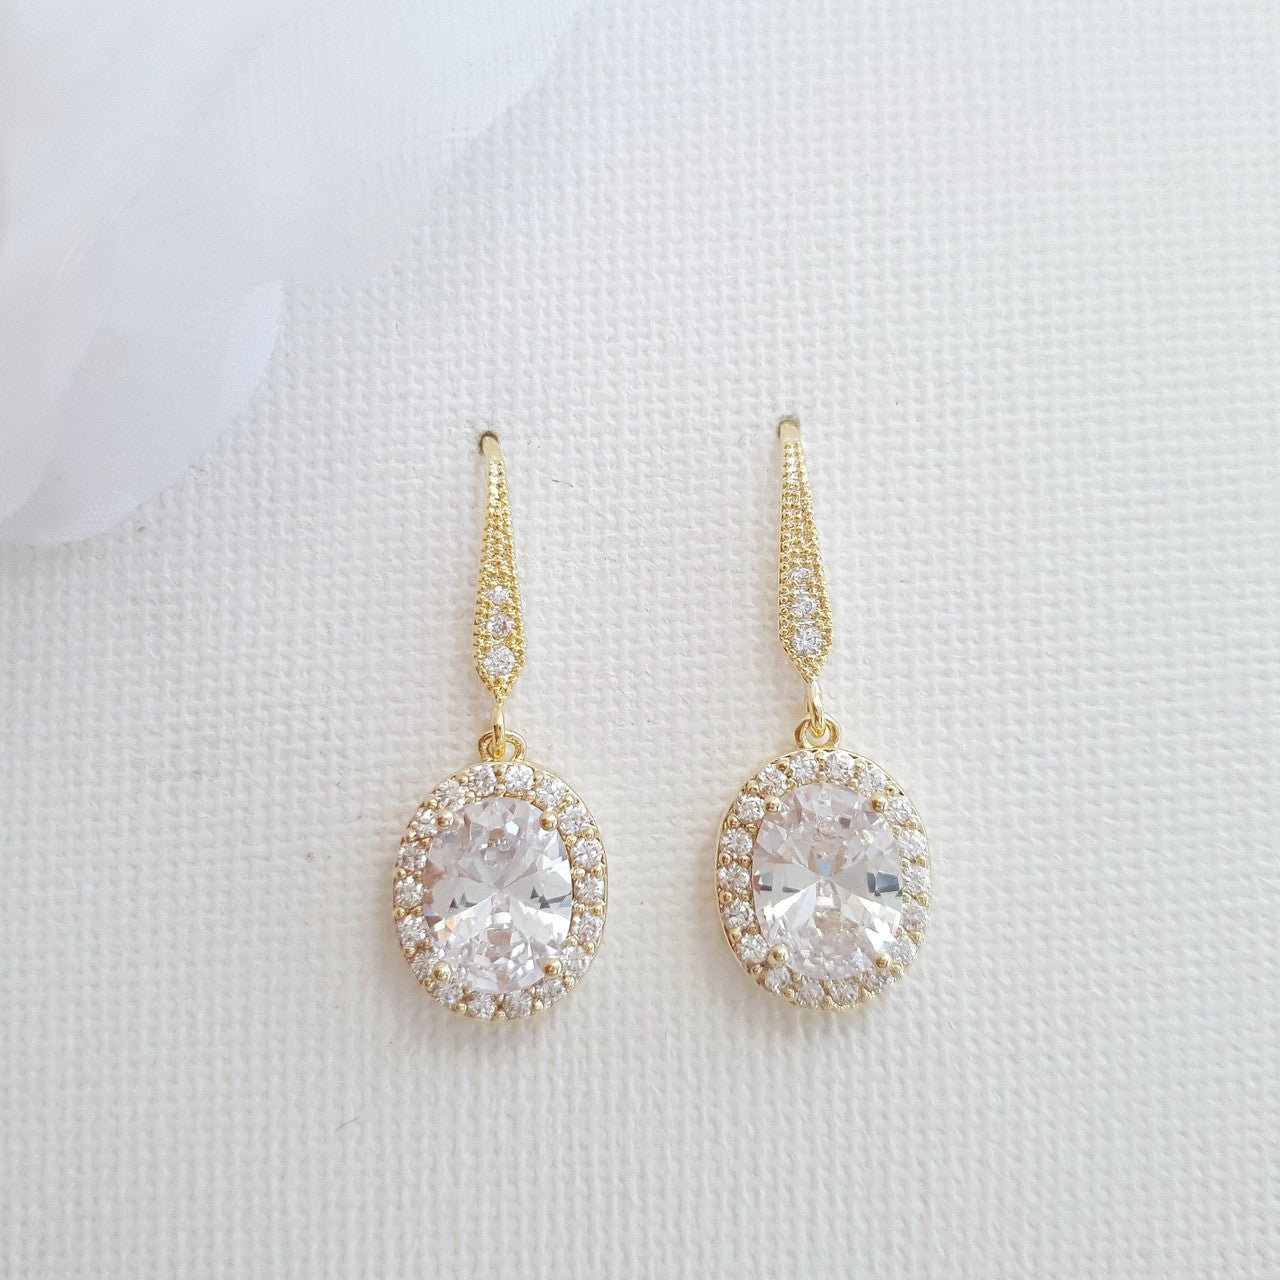 small gold dangle drop earrings for Brides, Bridesmaids, weddings- Poetry Designs